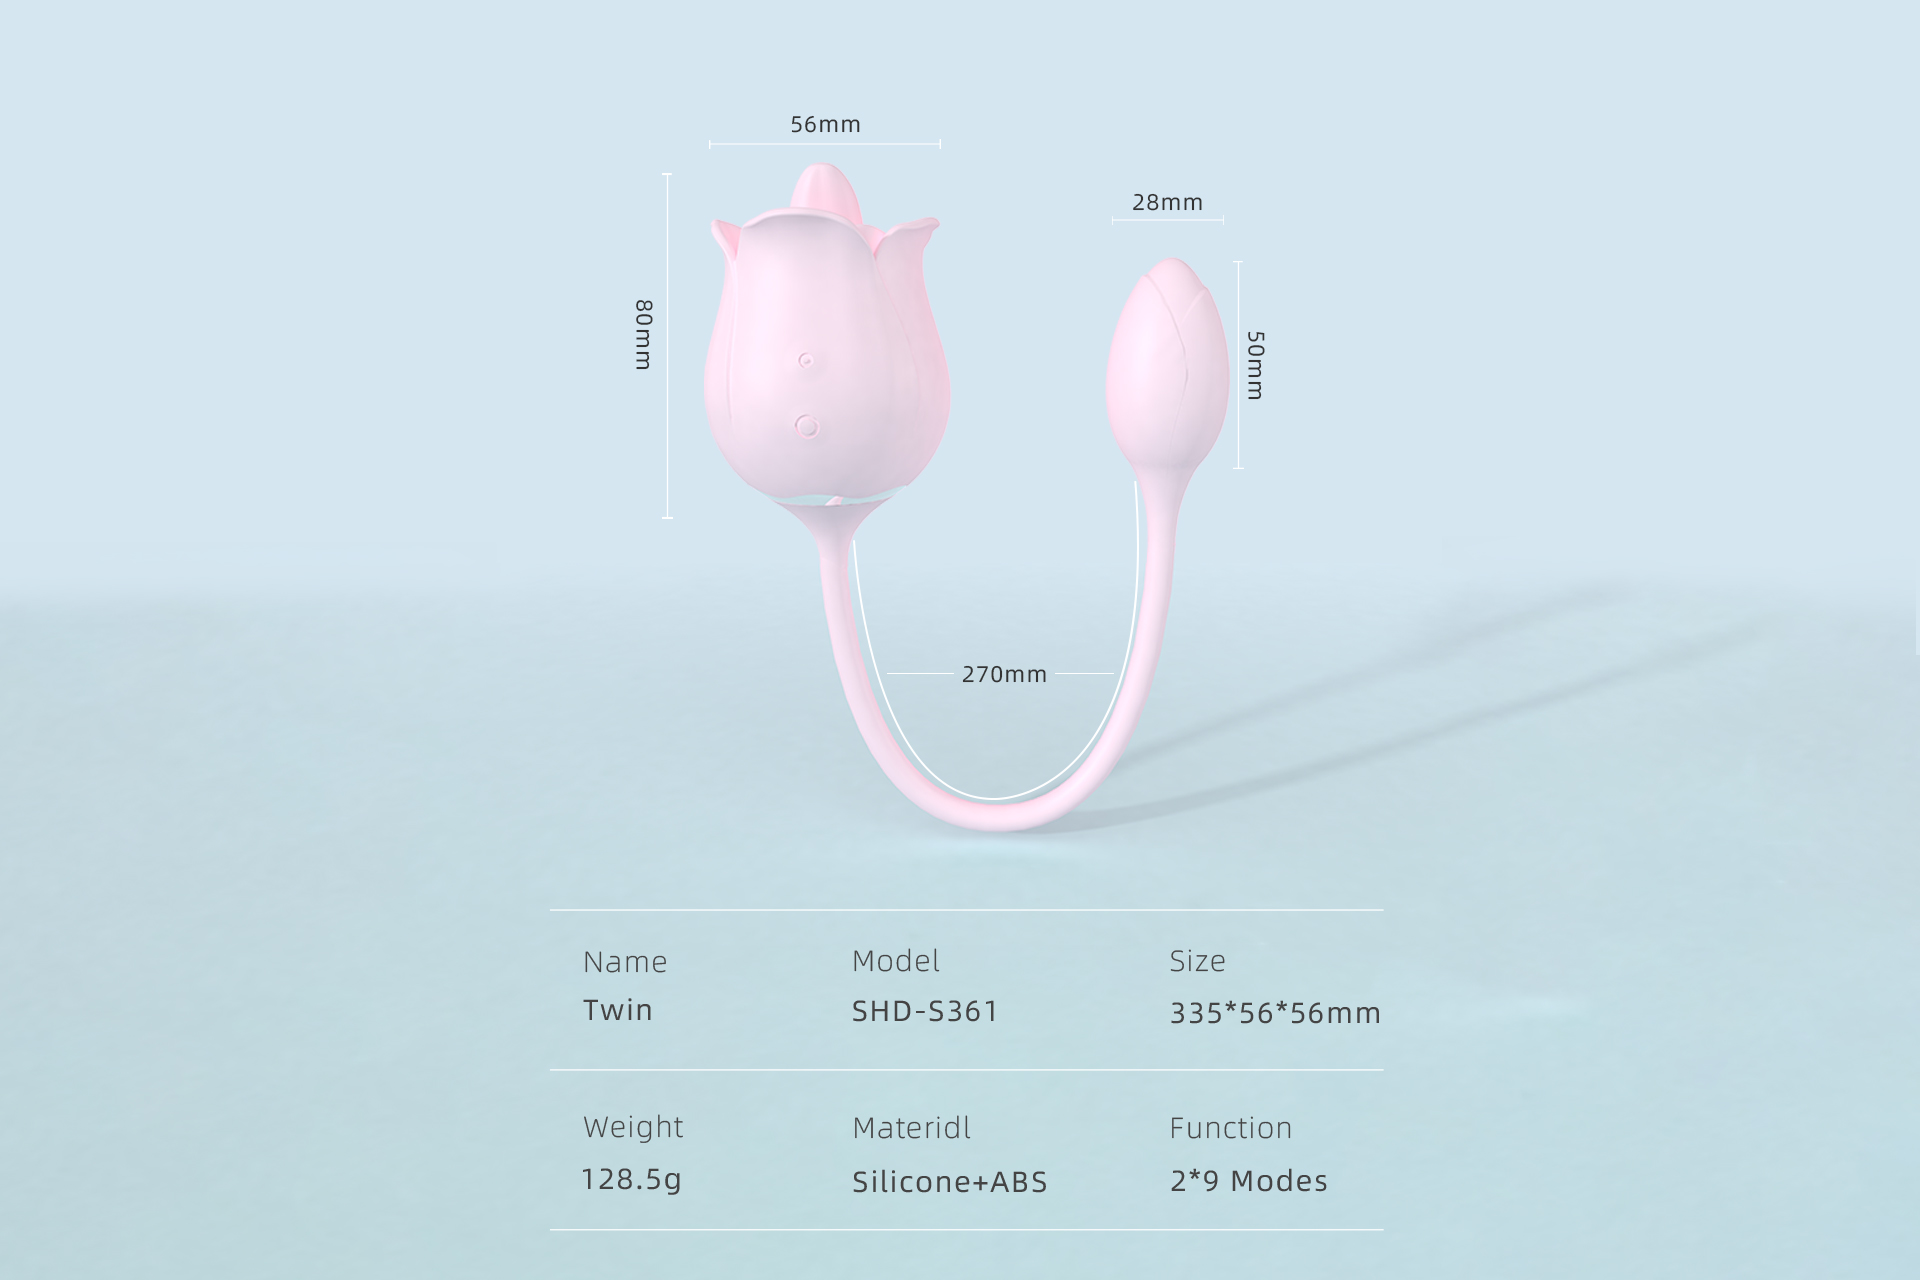 Rose vibrator tongue licking  nipple sucker rose sex toy oral licking stimulate masturbate adult toys massager For Women-07